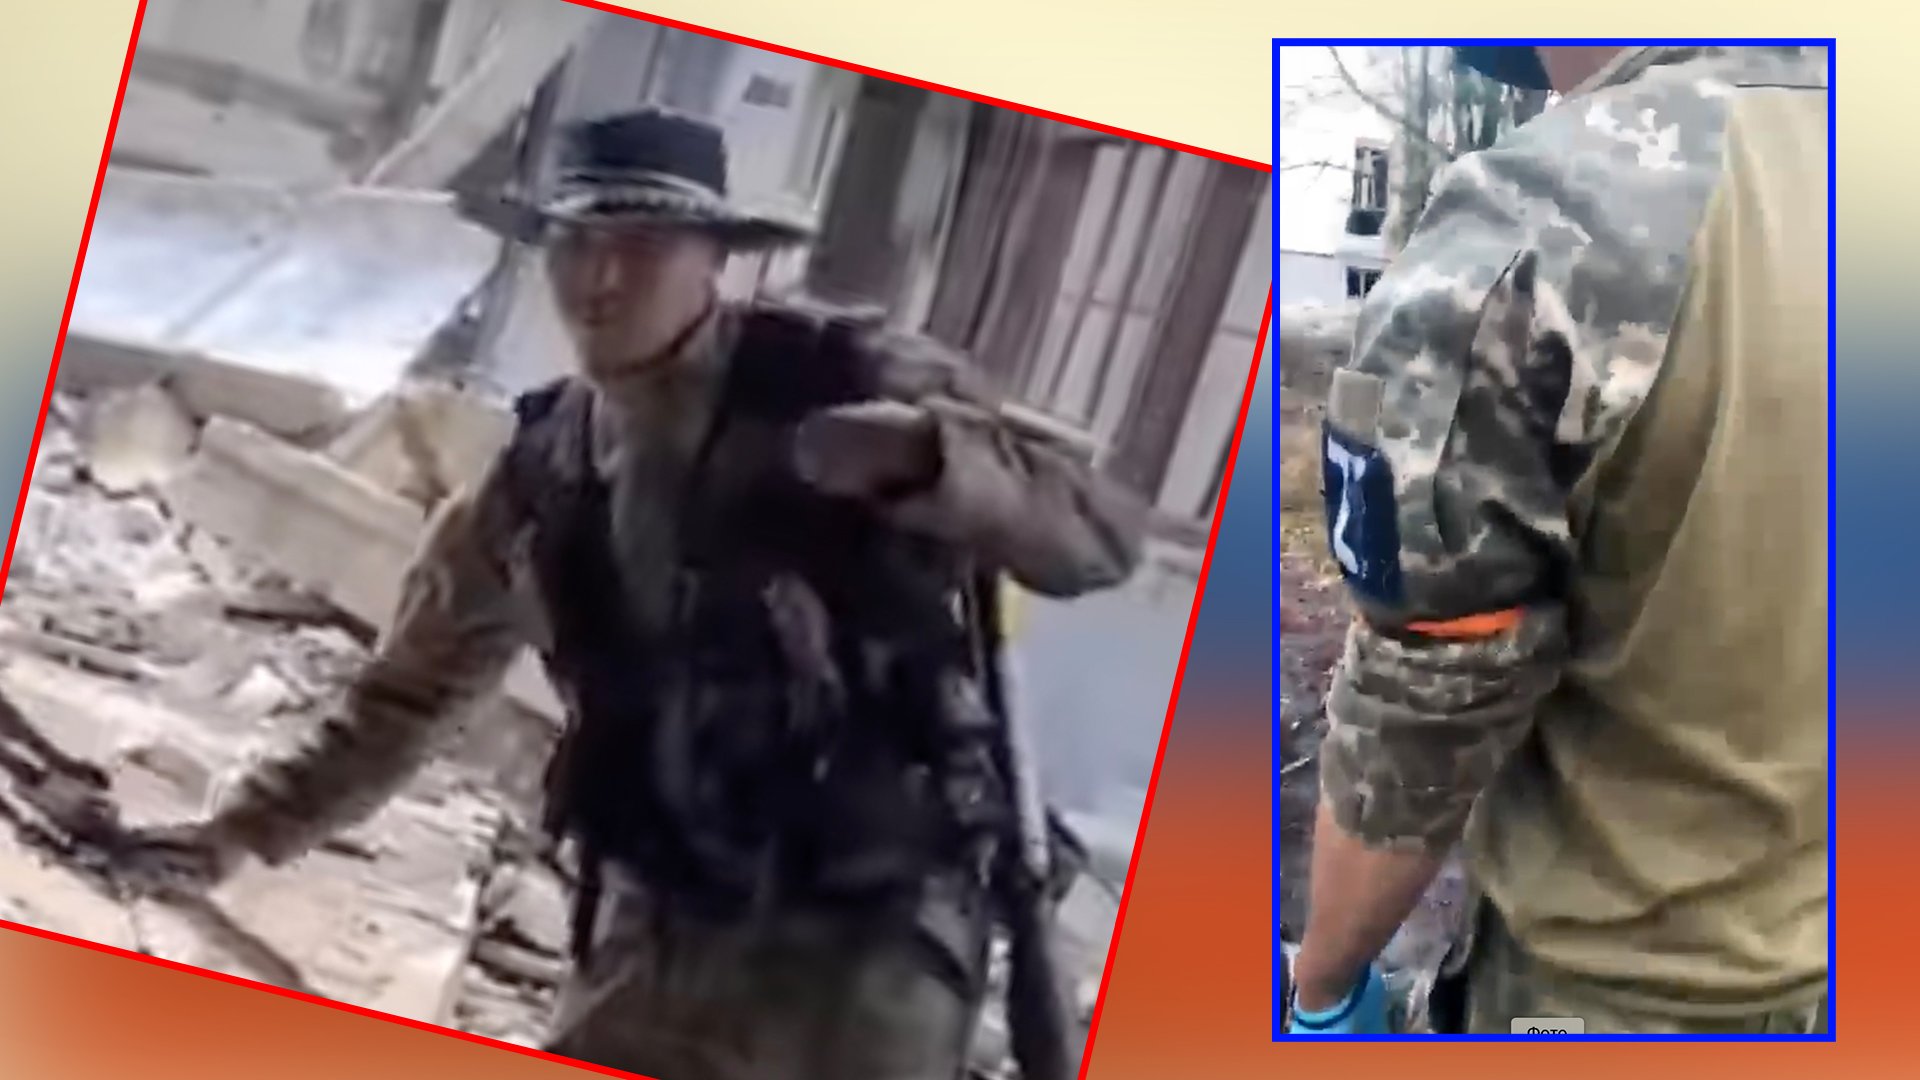 The man believed to be pictured in a battlefield video torturing a Ukrainian POW was captured in several other videos released by Russian media. Analysts have noted that the same soldier appears to be wearing the same distinctive wide-brimmed, tassled hat in both the torture video and those officially released.